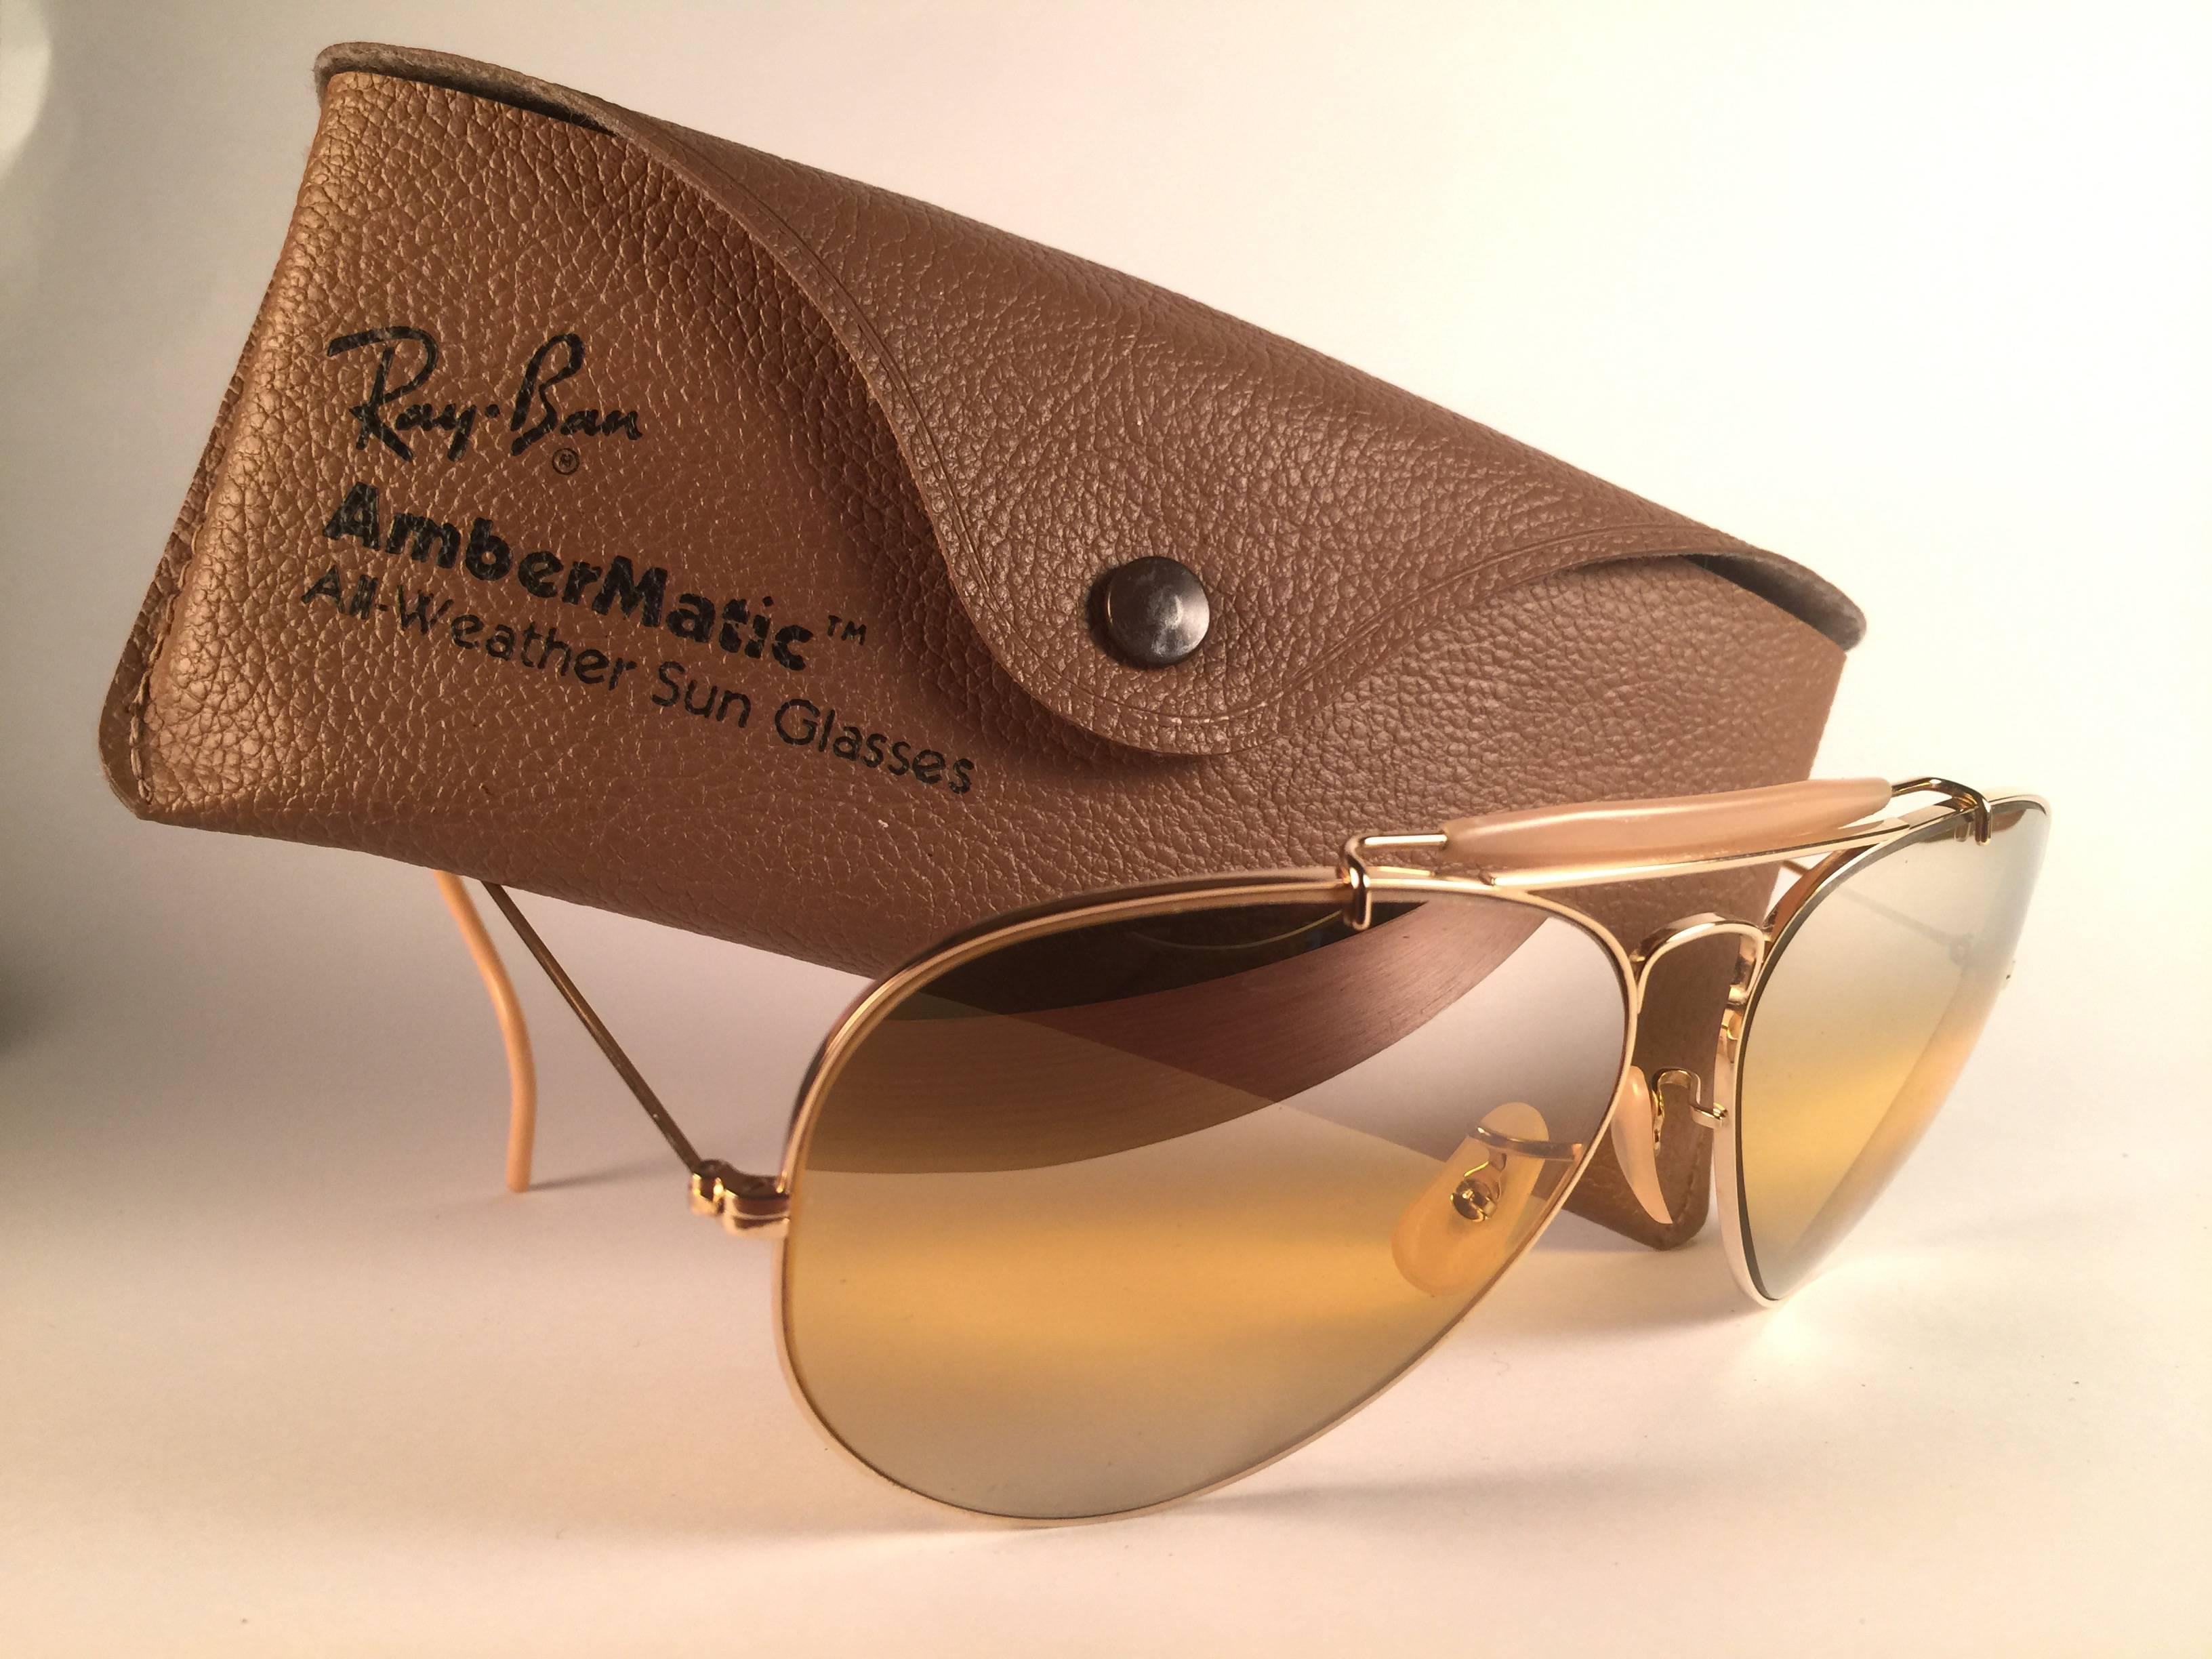 New Vintage Ray Ban Aviator Gold 62mm with double mirror Ambermatic lenses.  B&L etched twice in both lenses.  Comes with its original Ray Ban B&L case. Please notice this pair may have minor sign of wear due to nearly 40 years of storage. A seldom